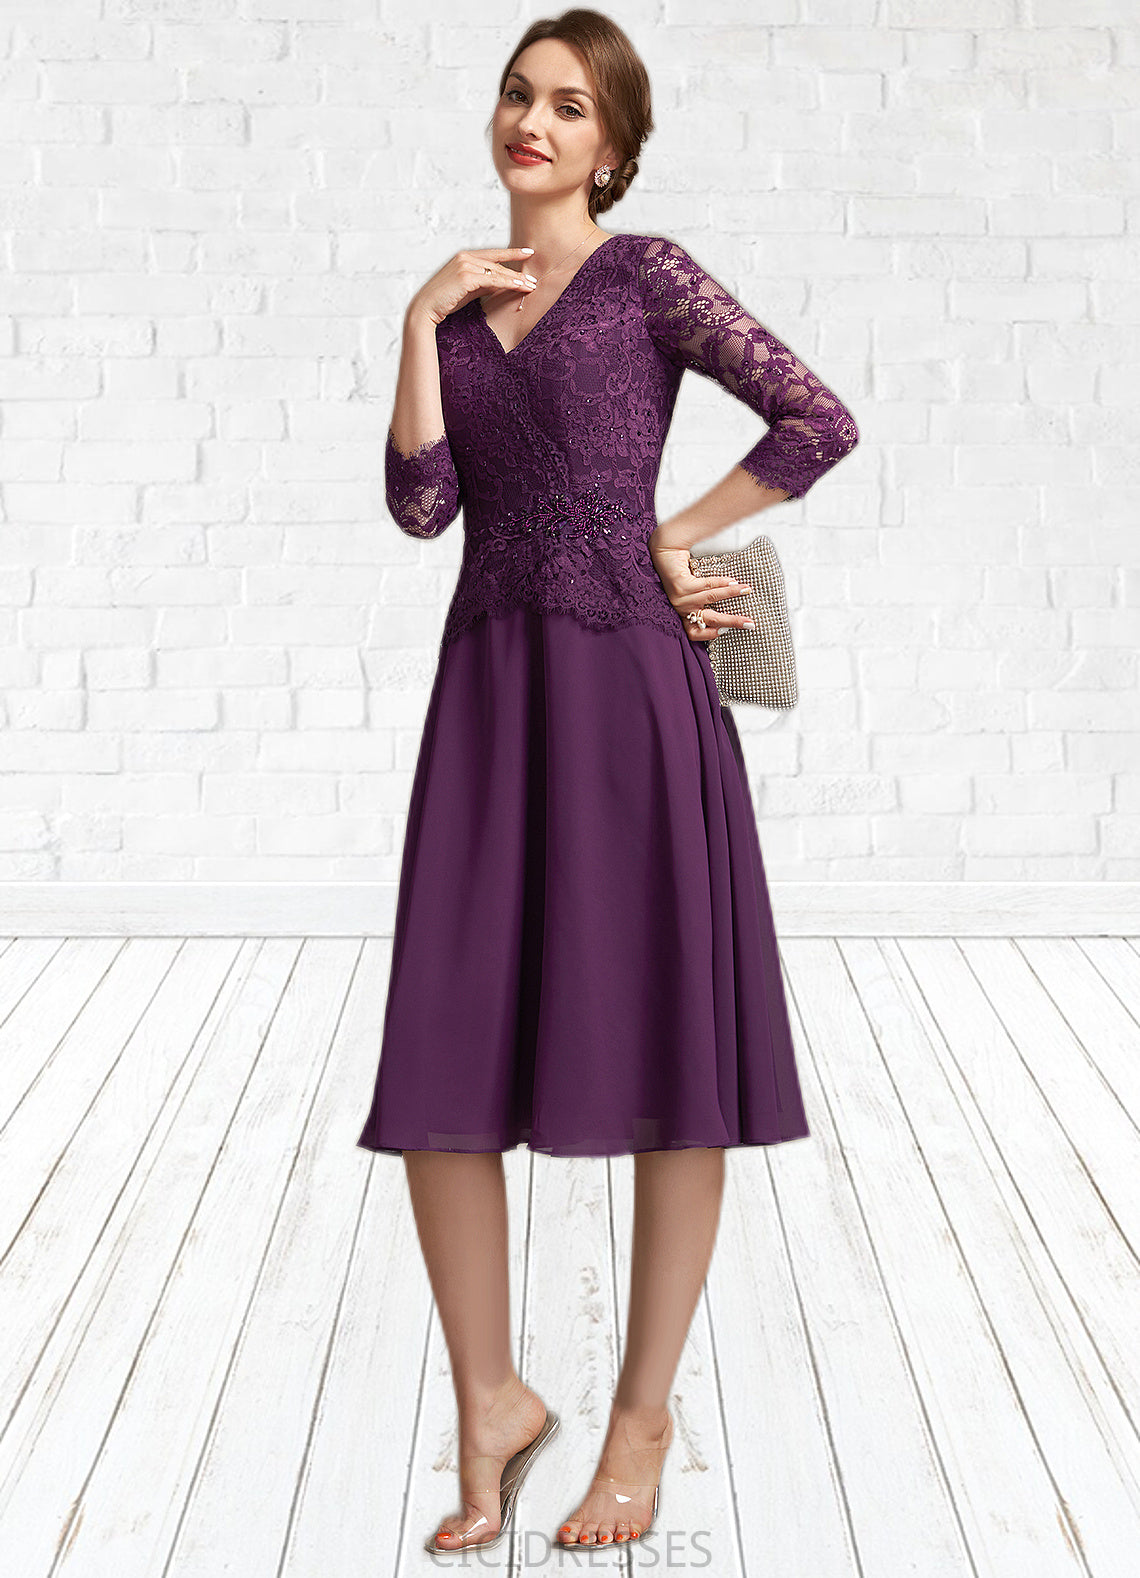 Willow A-Line V-neck Knee-Length Chiffon Lace Mother of the Bride Dress With Beading Sequins CIC8126P0015035